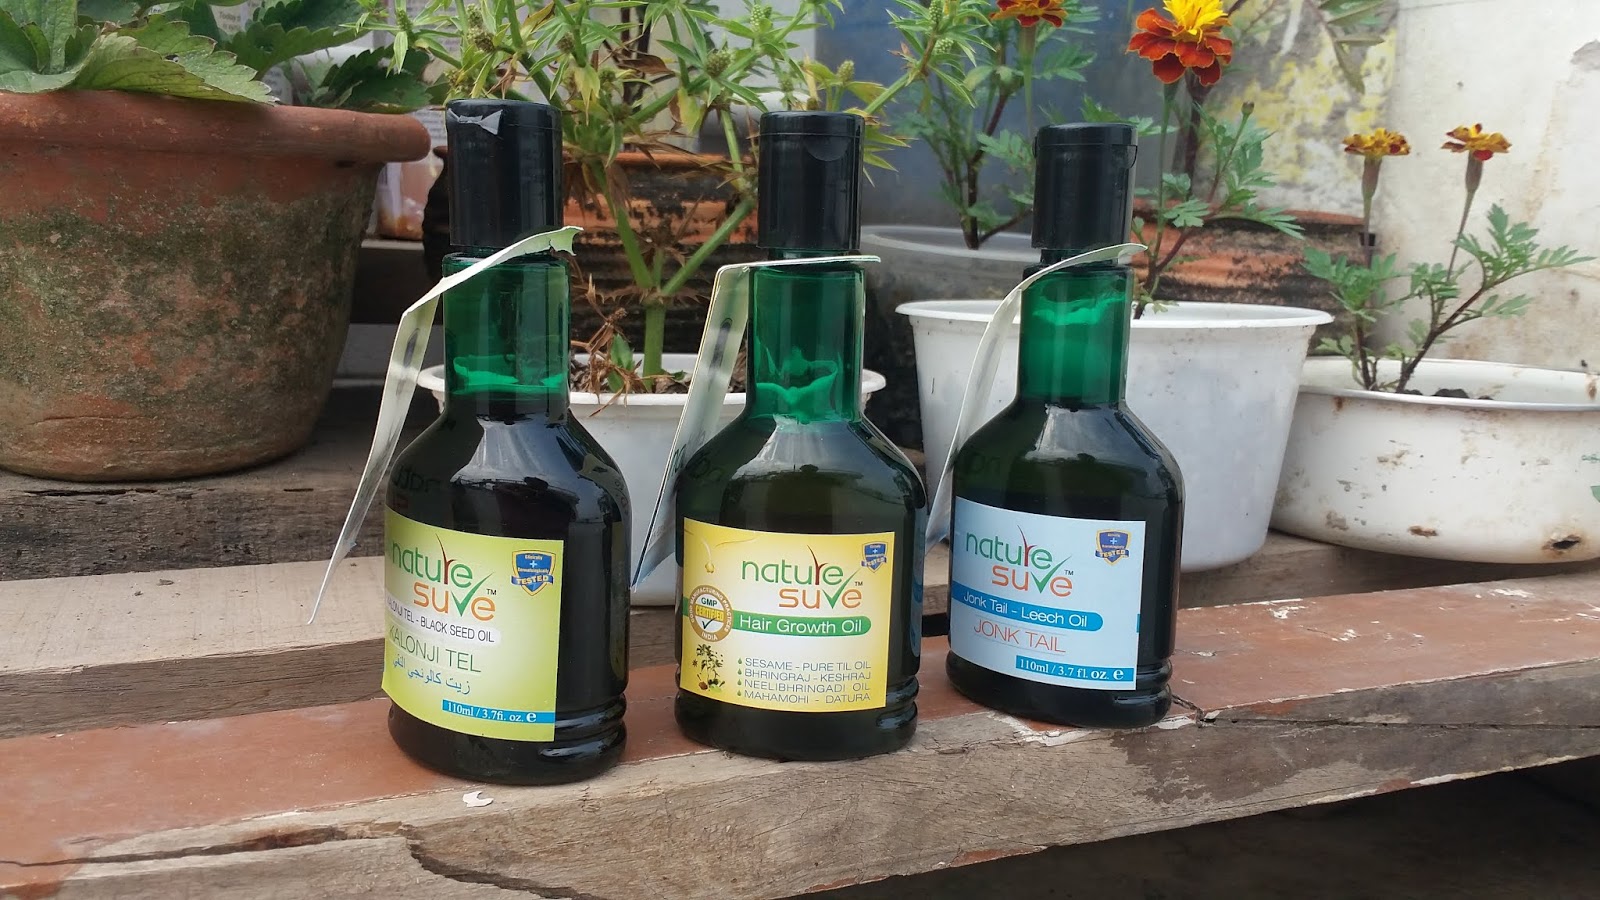 3 100% Natural Oil from Nature Sure // Kalonji Oil // Hair Growth Oil //  Jonk Oil : Tried and Tested - Beauty and Lifestyle Mantra - India's Top  Beauty and Lifestyle Blog